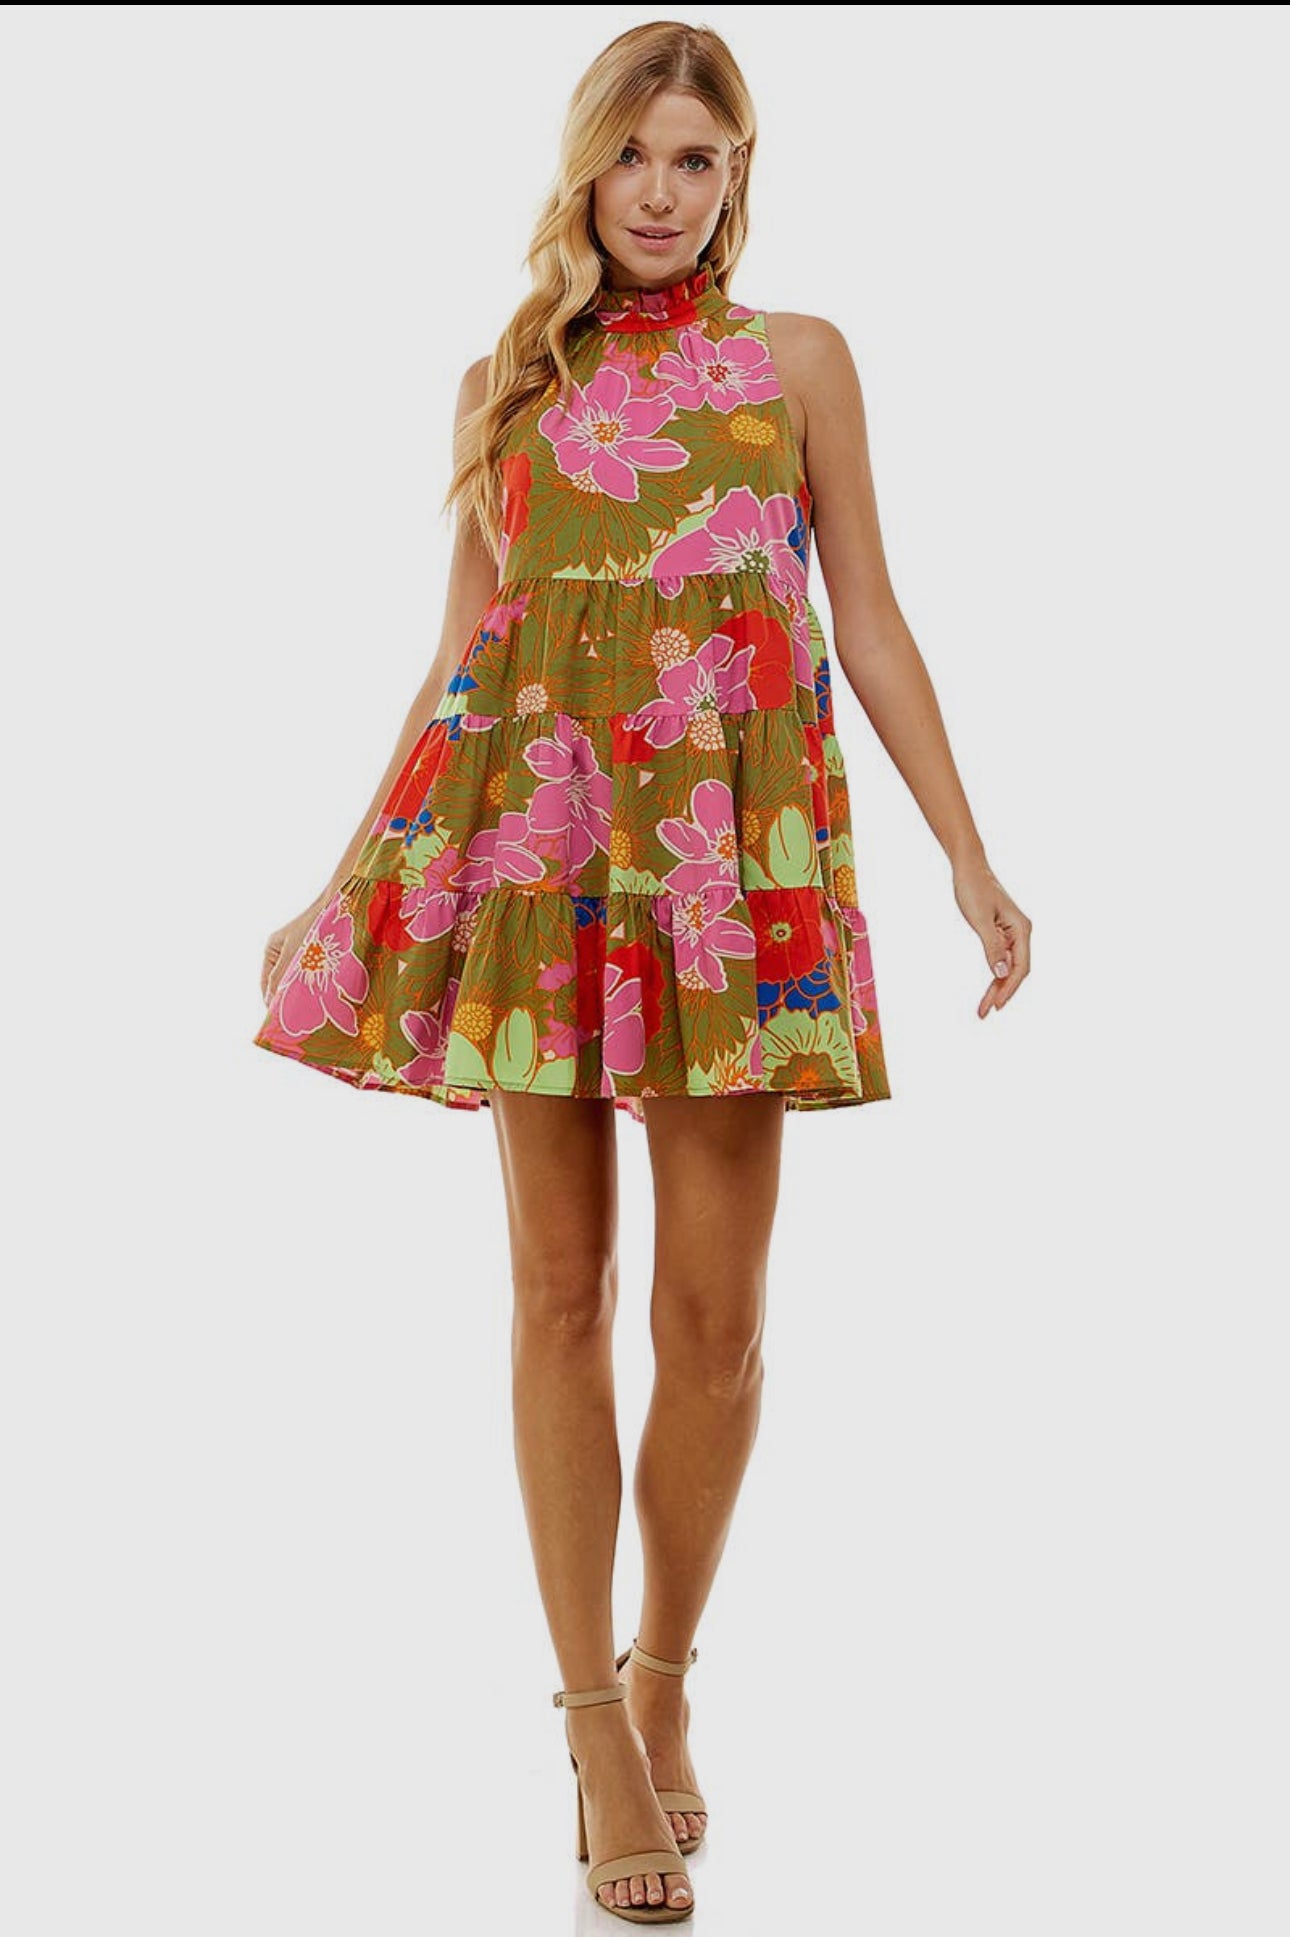 The Mary Alice floral dress